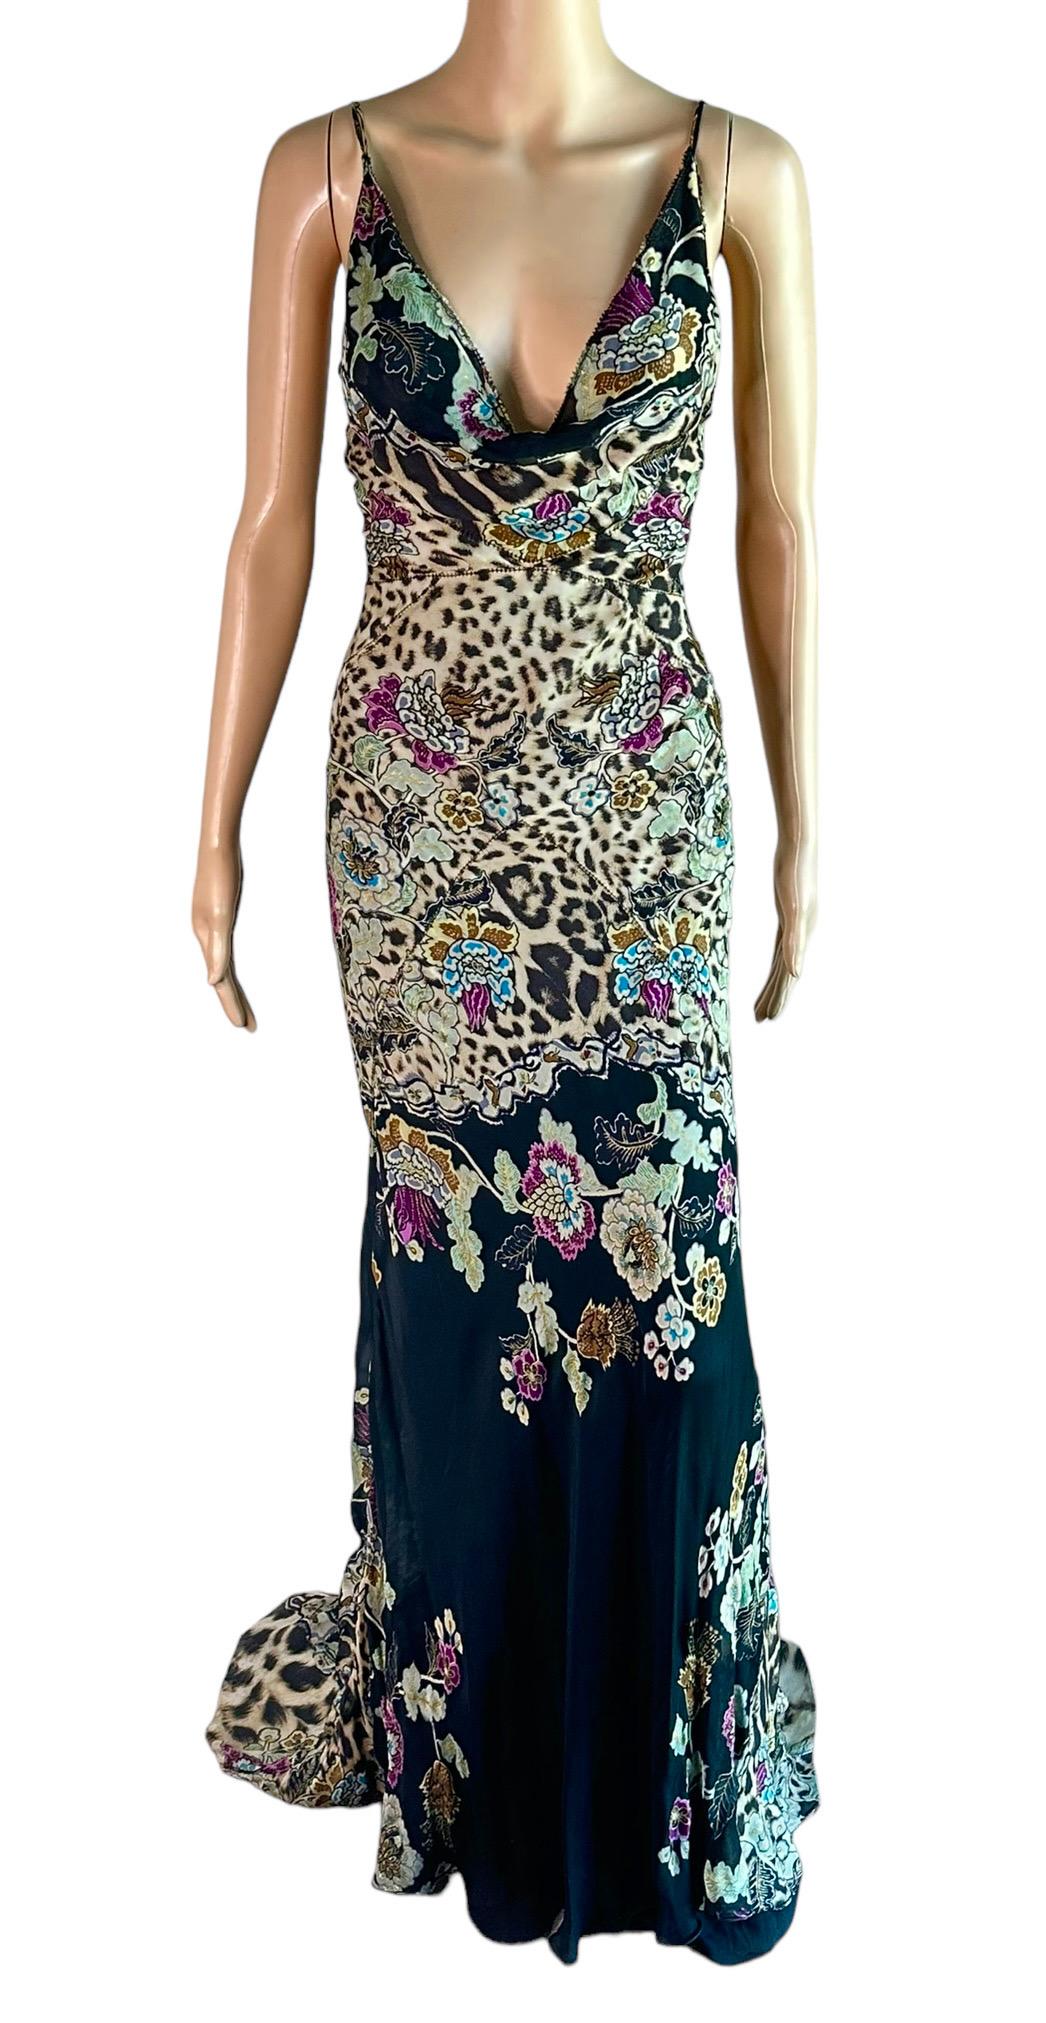 Roberto Cavalli S/S 2003 Chinoiserie Print Silk Train Maxi Evening Dress Gown For Sale 1